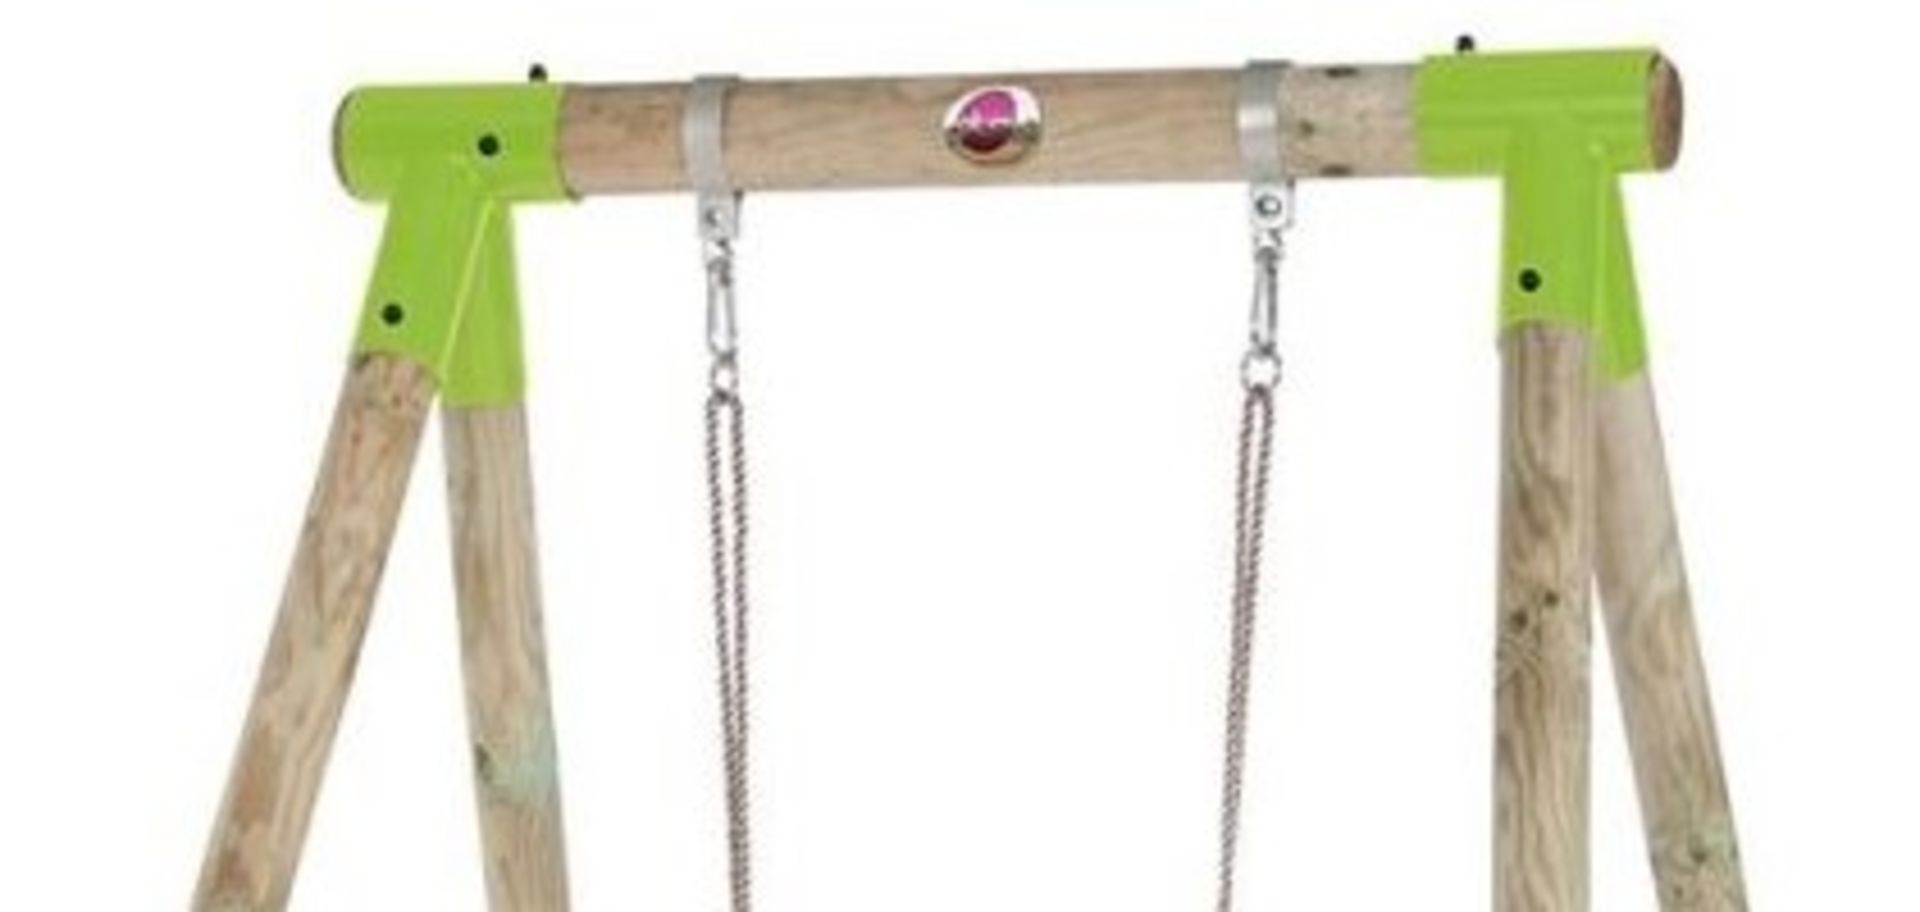 1 x Plum Quoll Childrens Swing Hardware Accessories - Wooden Beams and Swing Seat Not Included - New